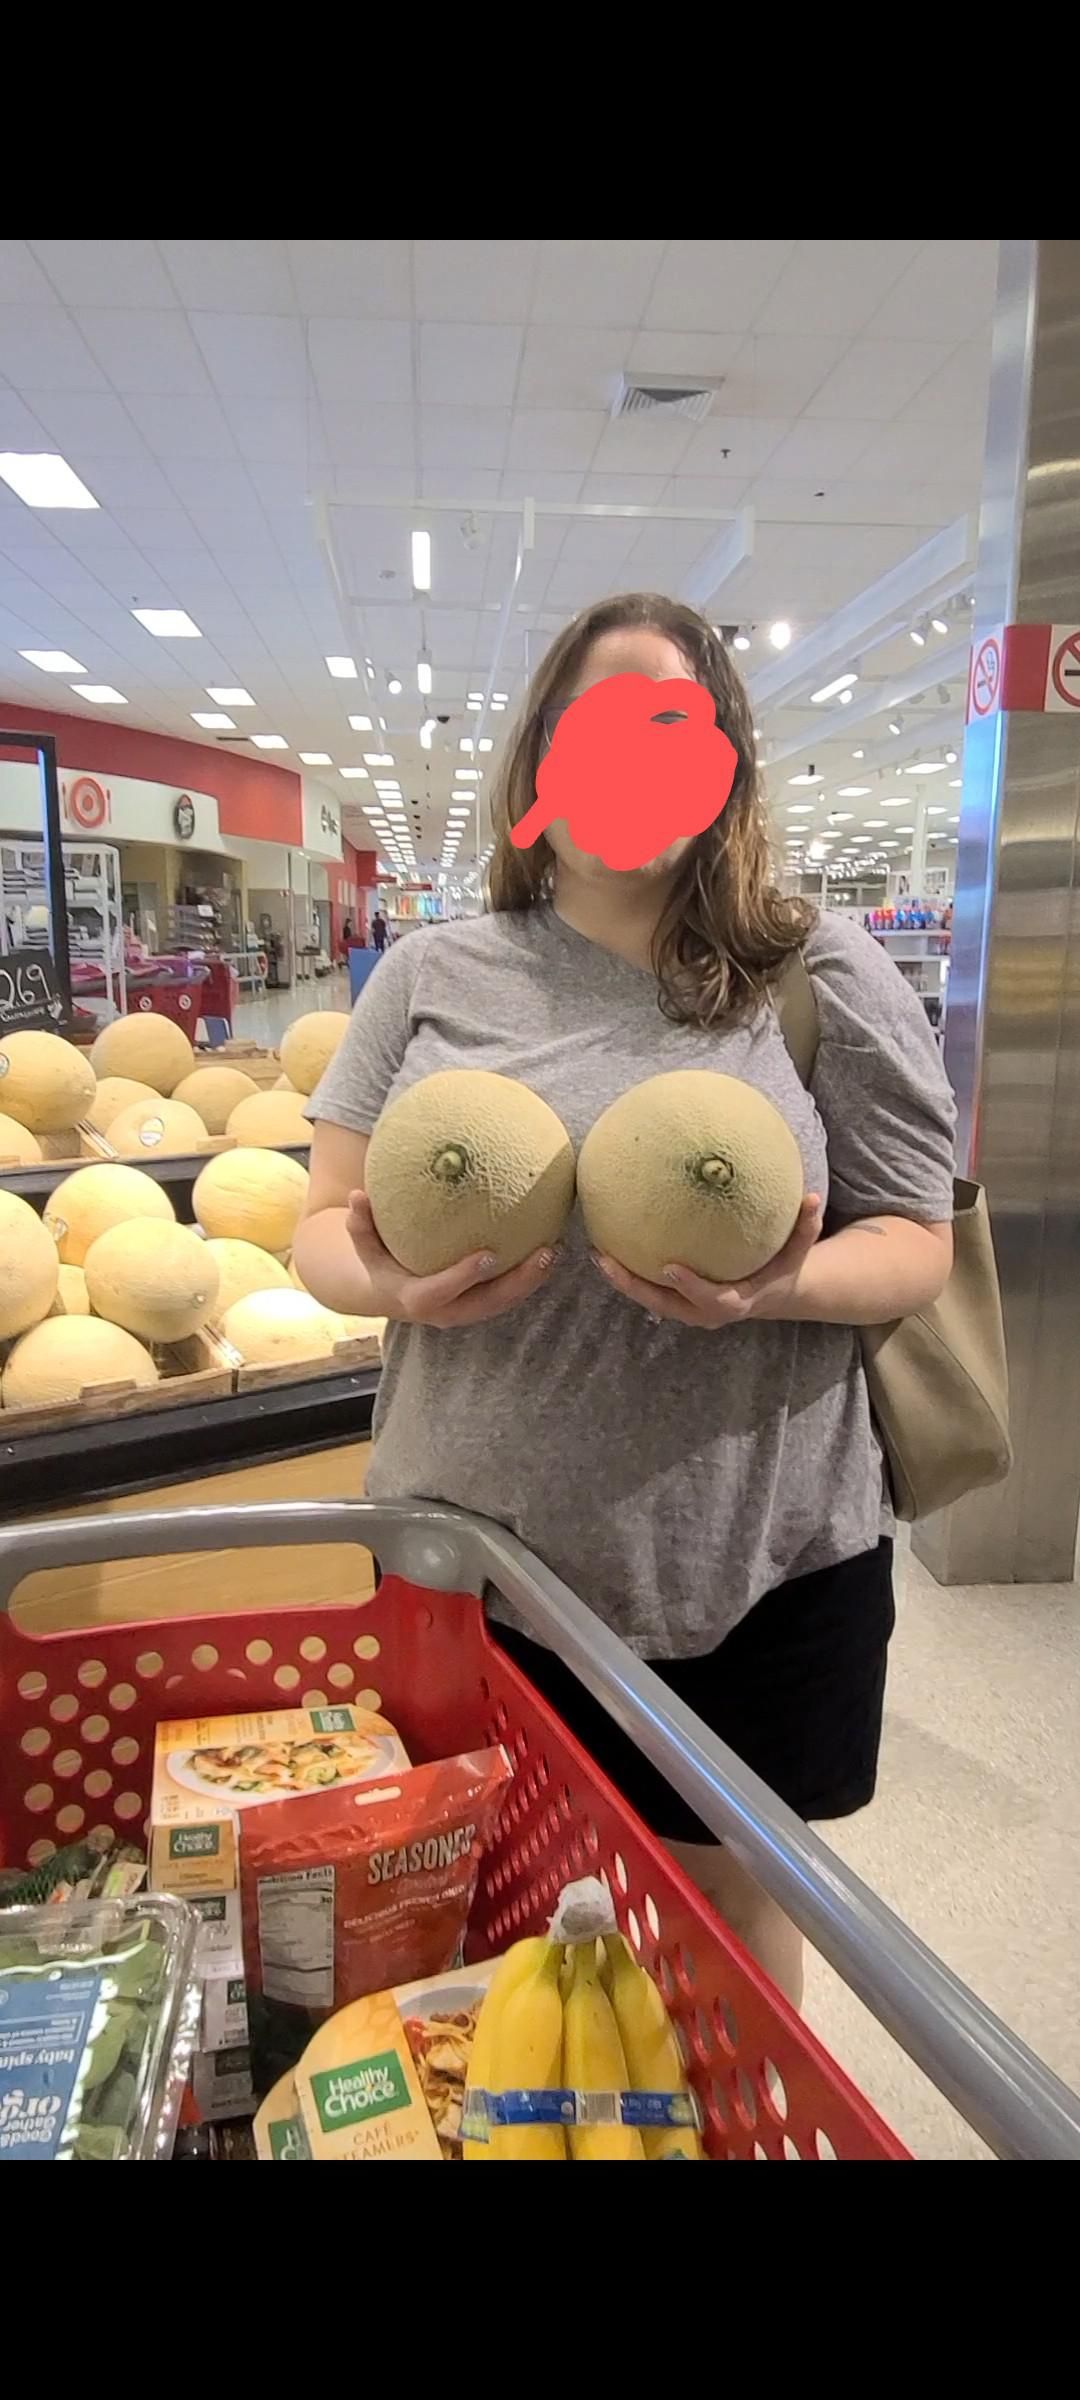 My wife, ladies and gentlemen, spontaneously asking me which melon I like best.